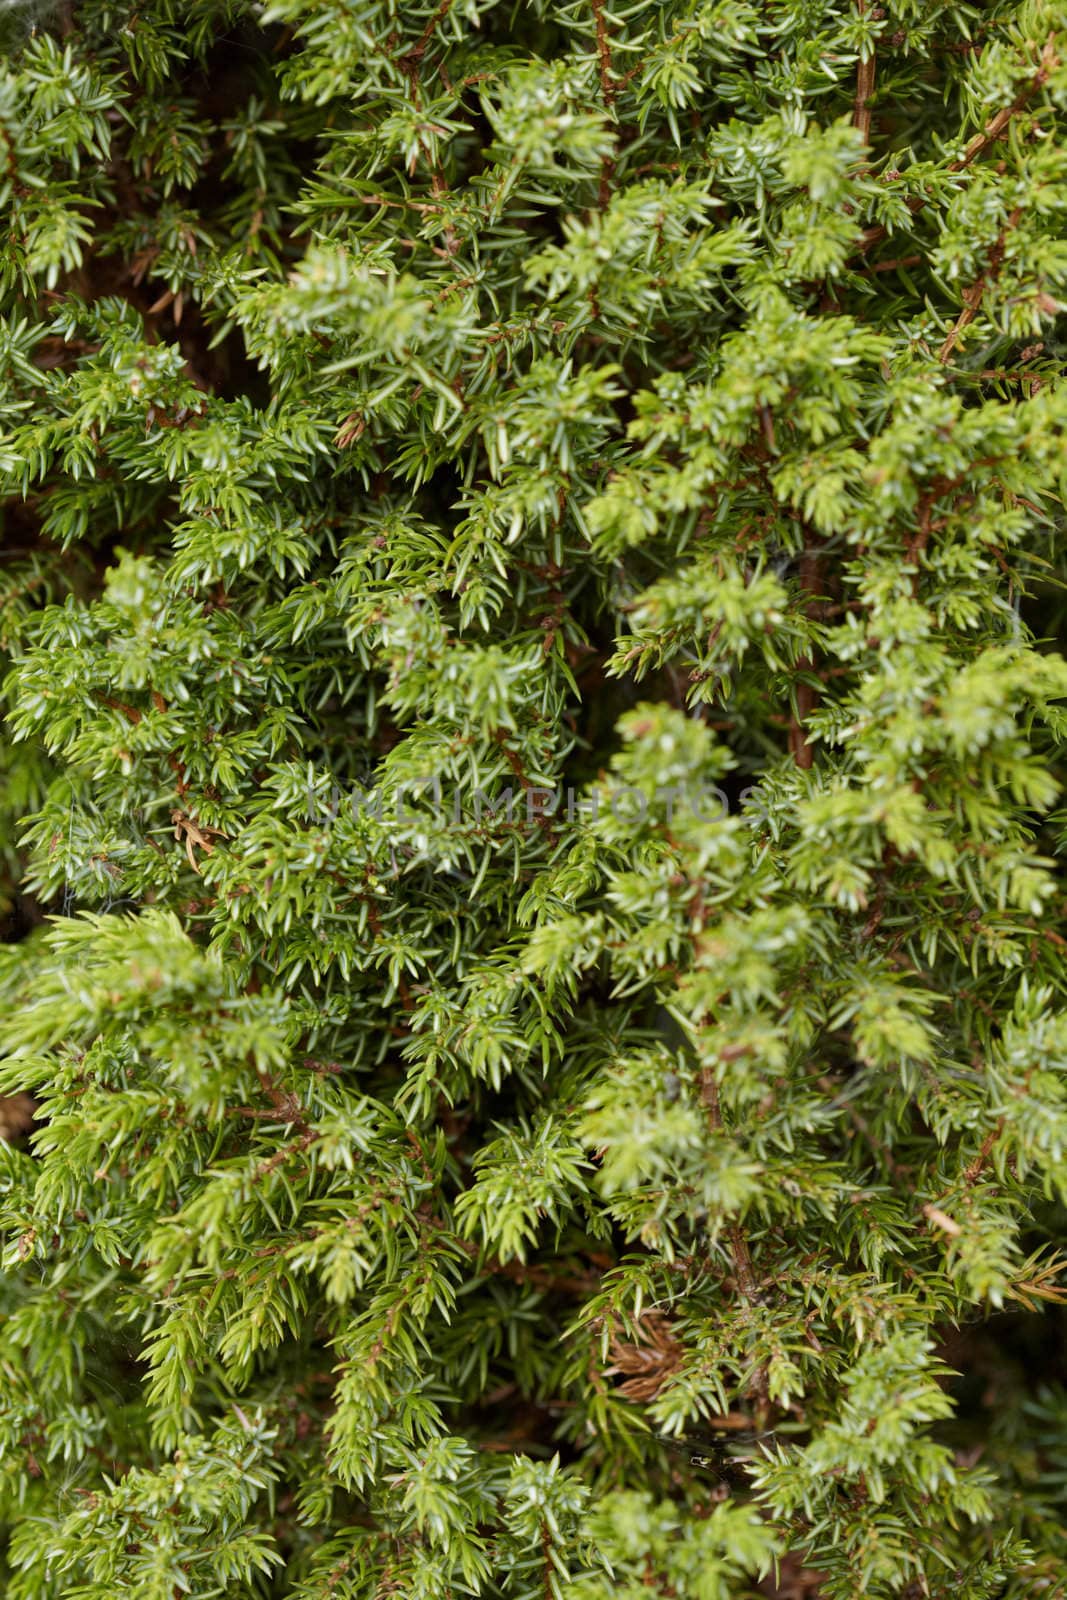 Green branches of a juniper close up - a natural background